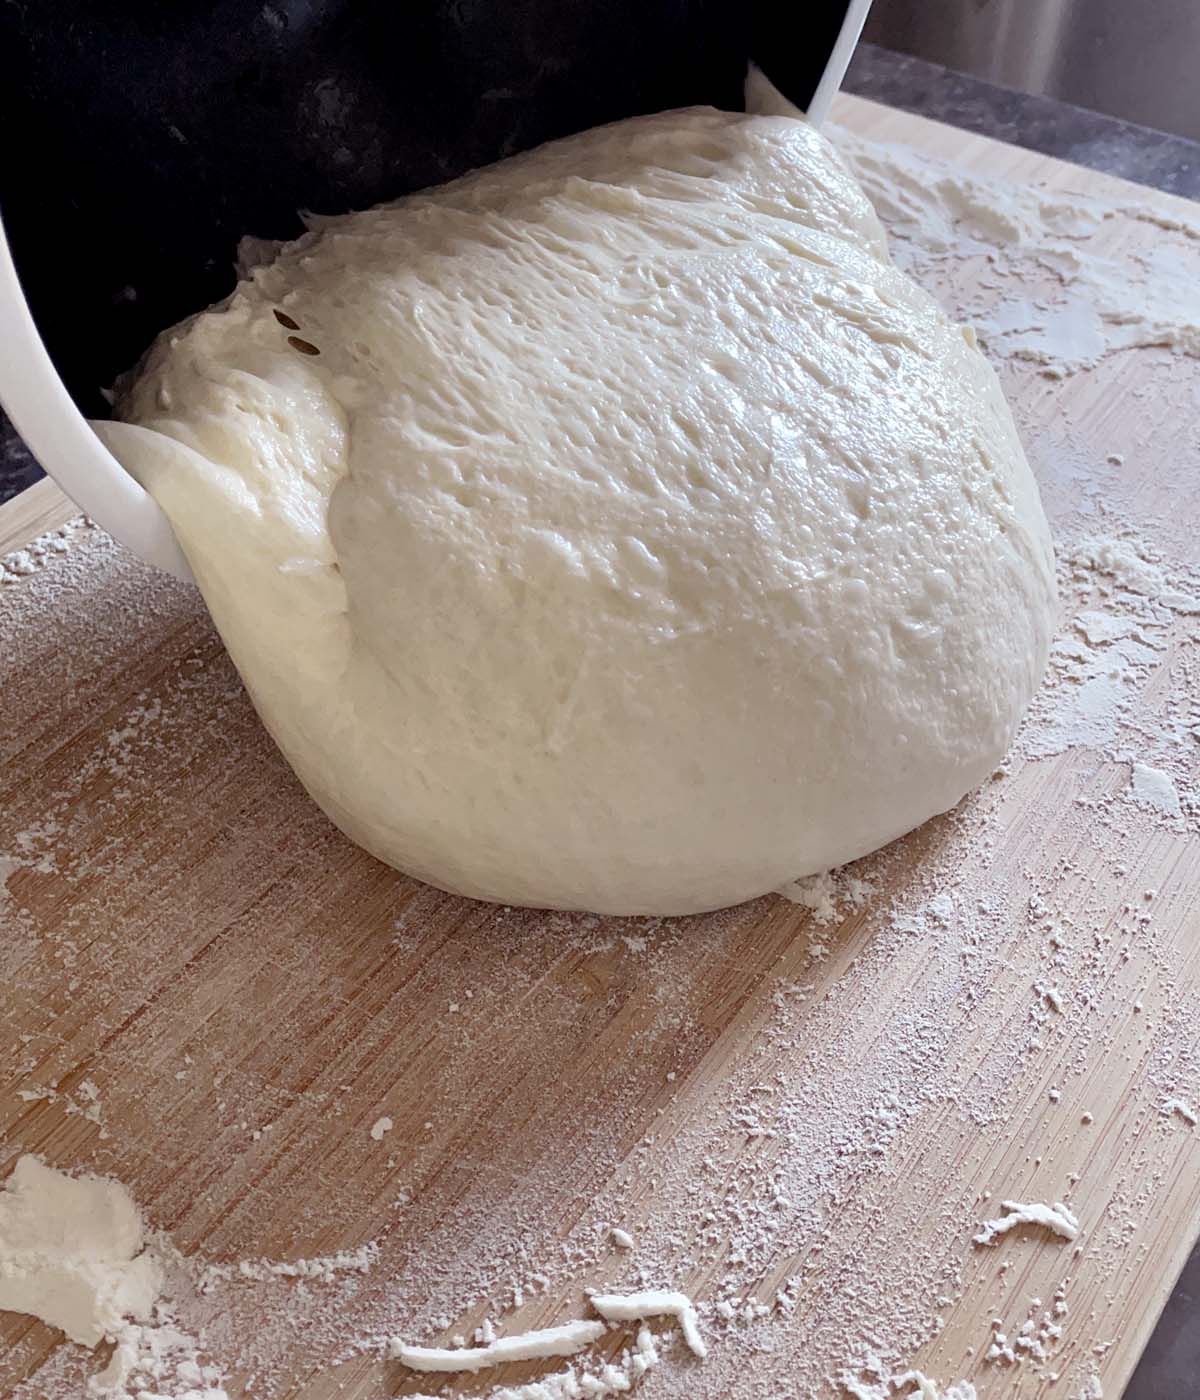 A ball of bread dough being poured out of a bowl and onto a floured wooden cutting board.